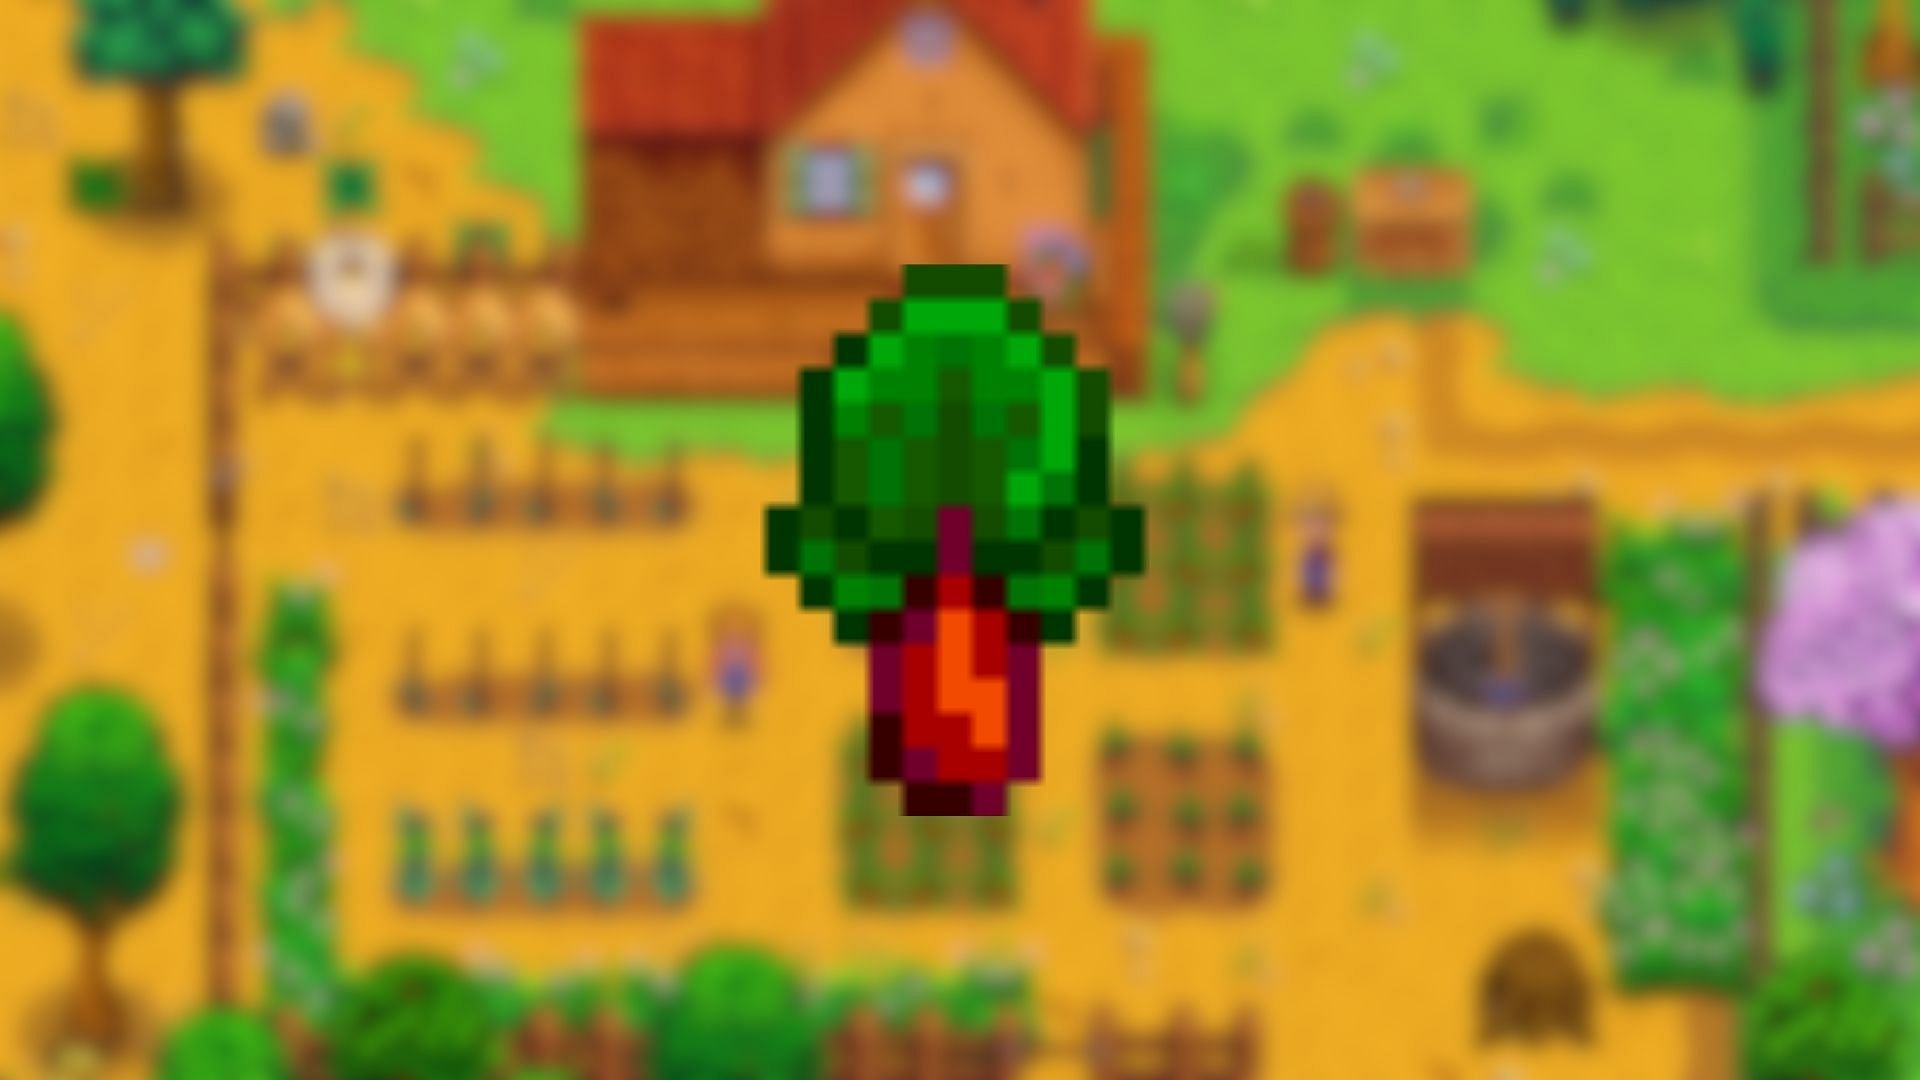 Rhubarb are useful not only for selling but also for crafting energy-boosting food (Image via ConcernedApe)